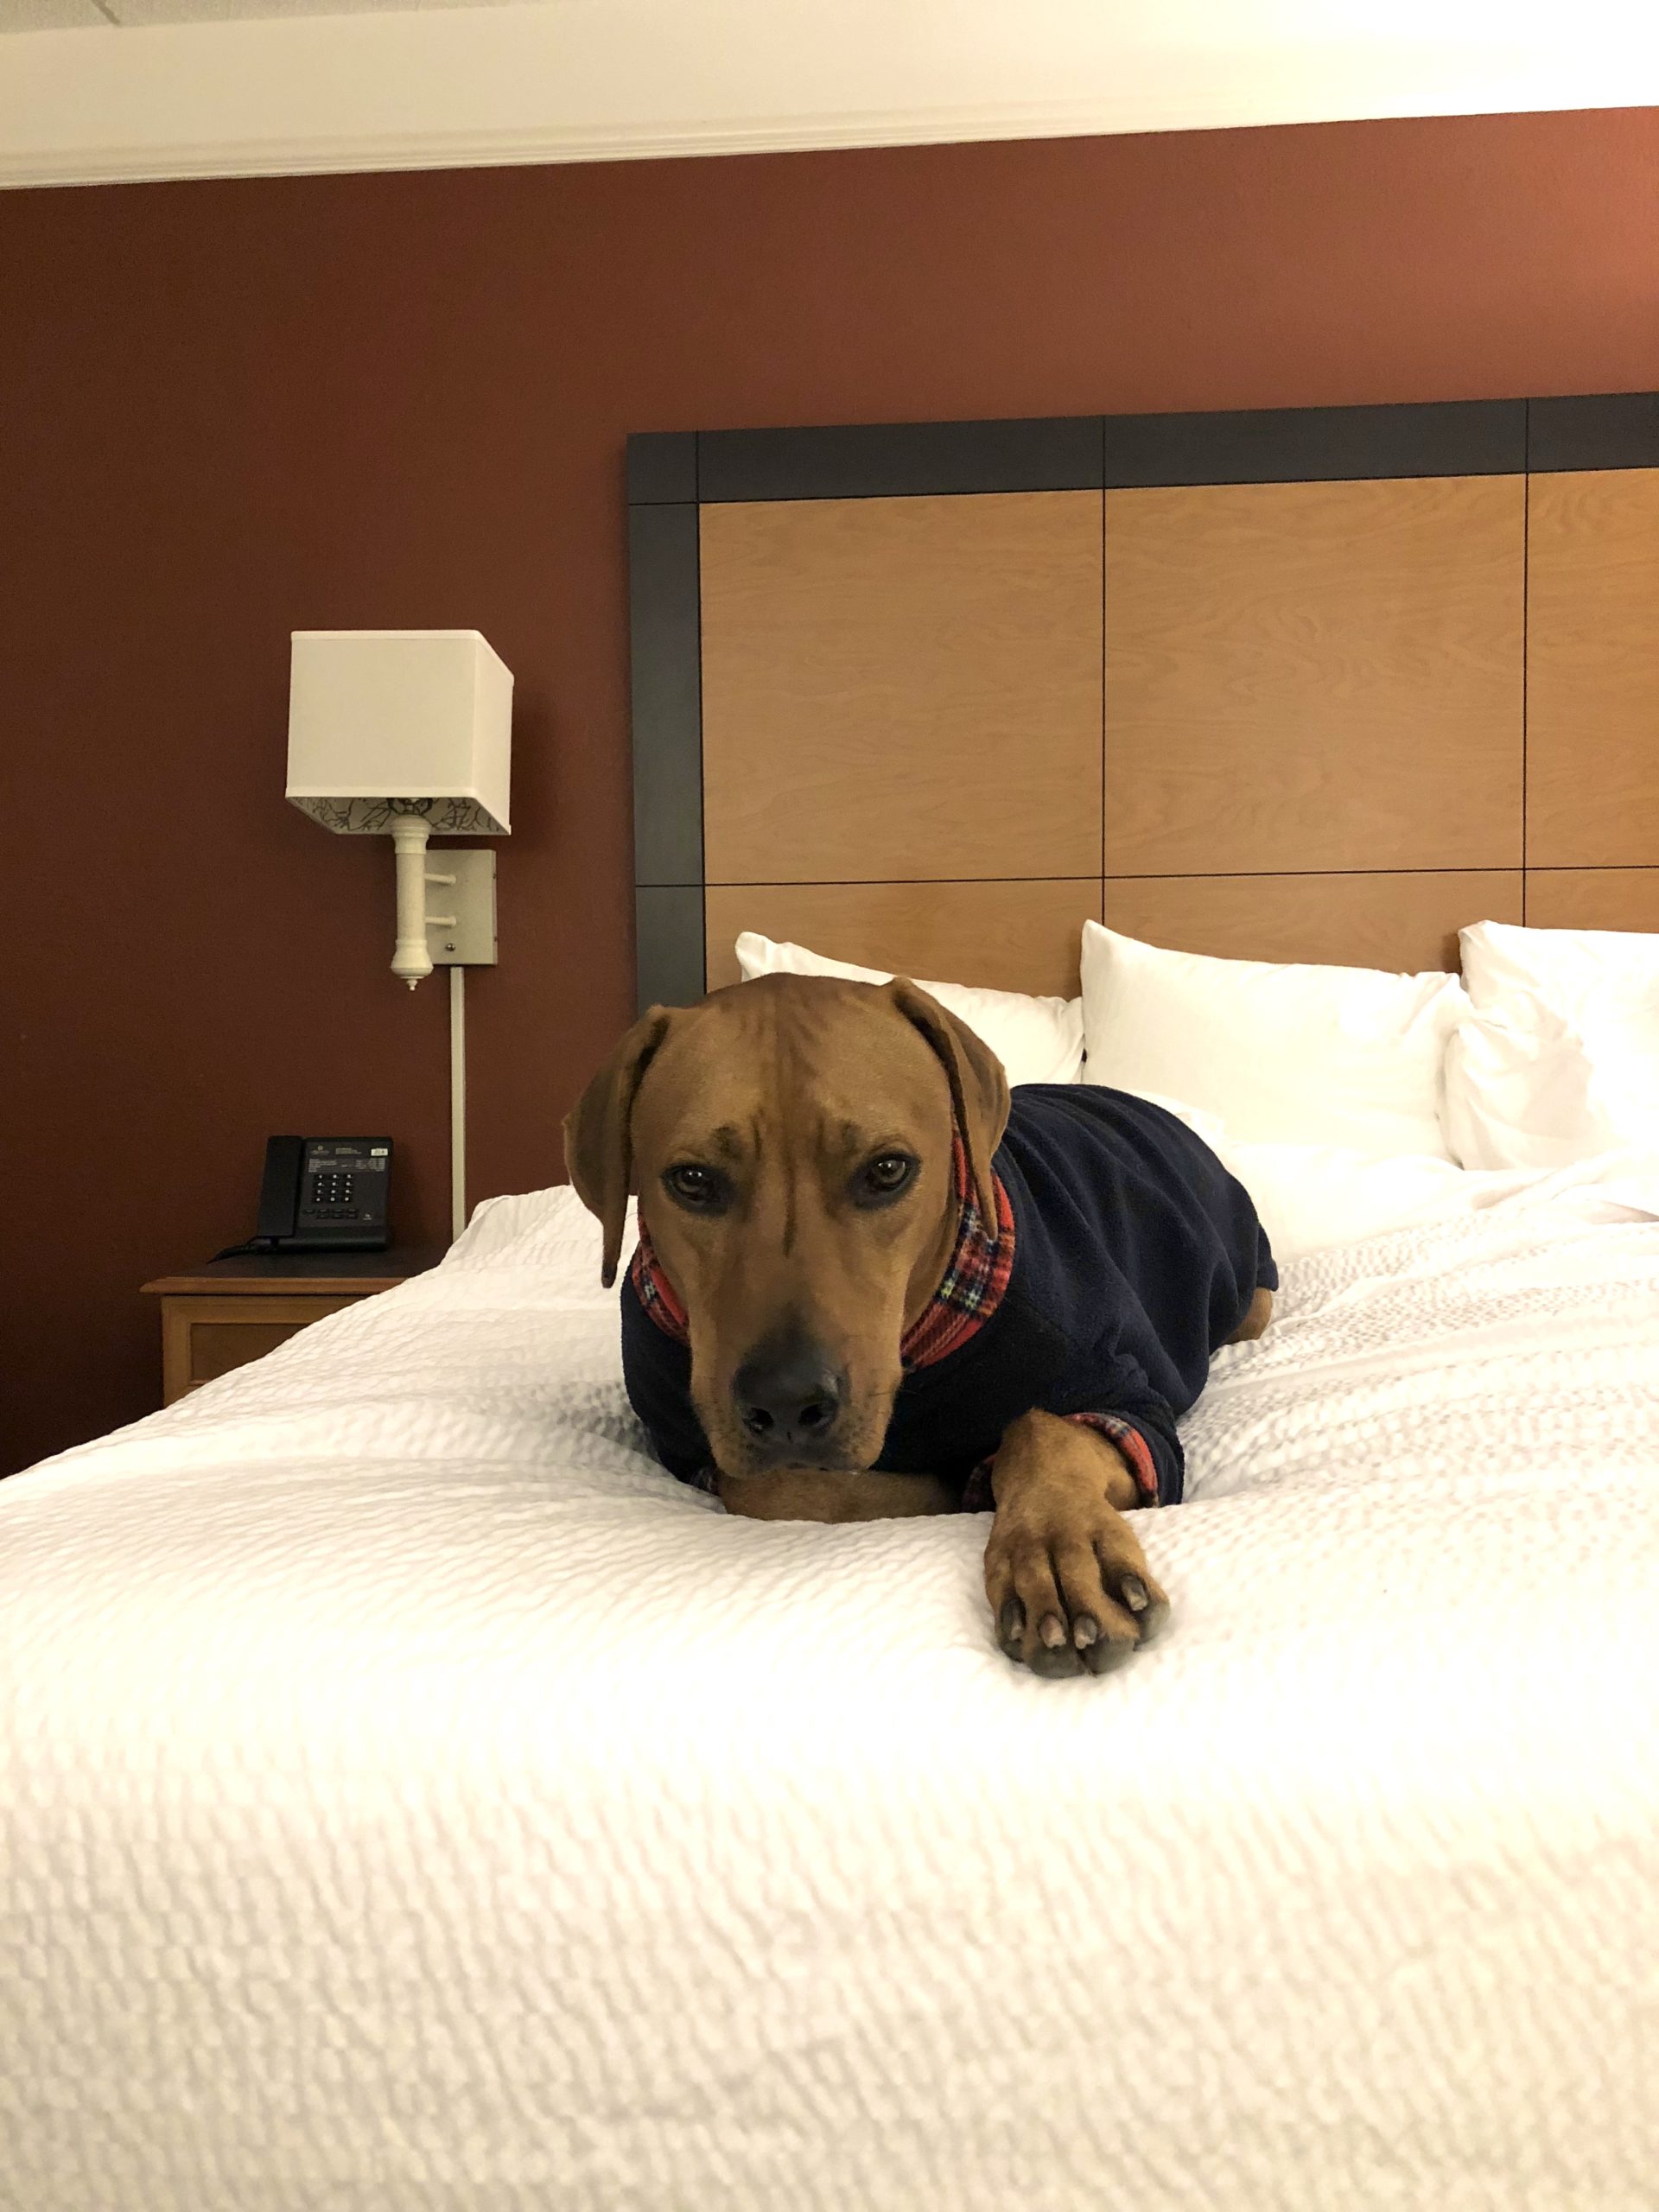 Colombo wearing his dog pajamas in a hotel